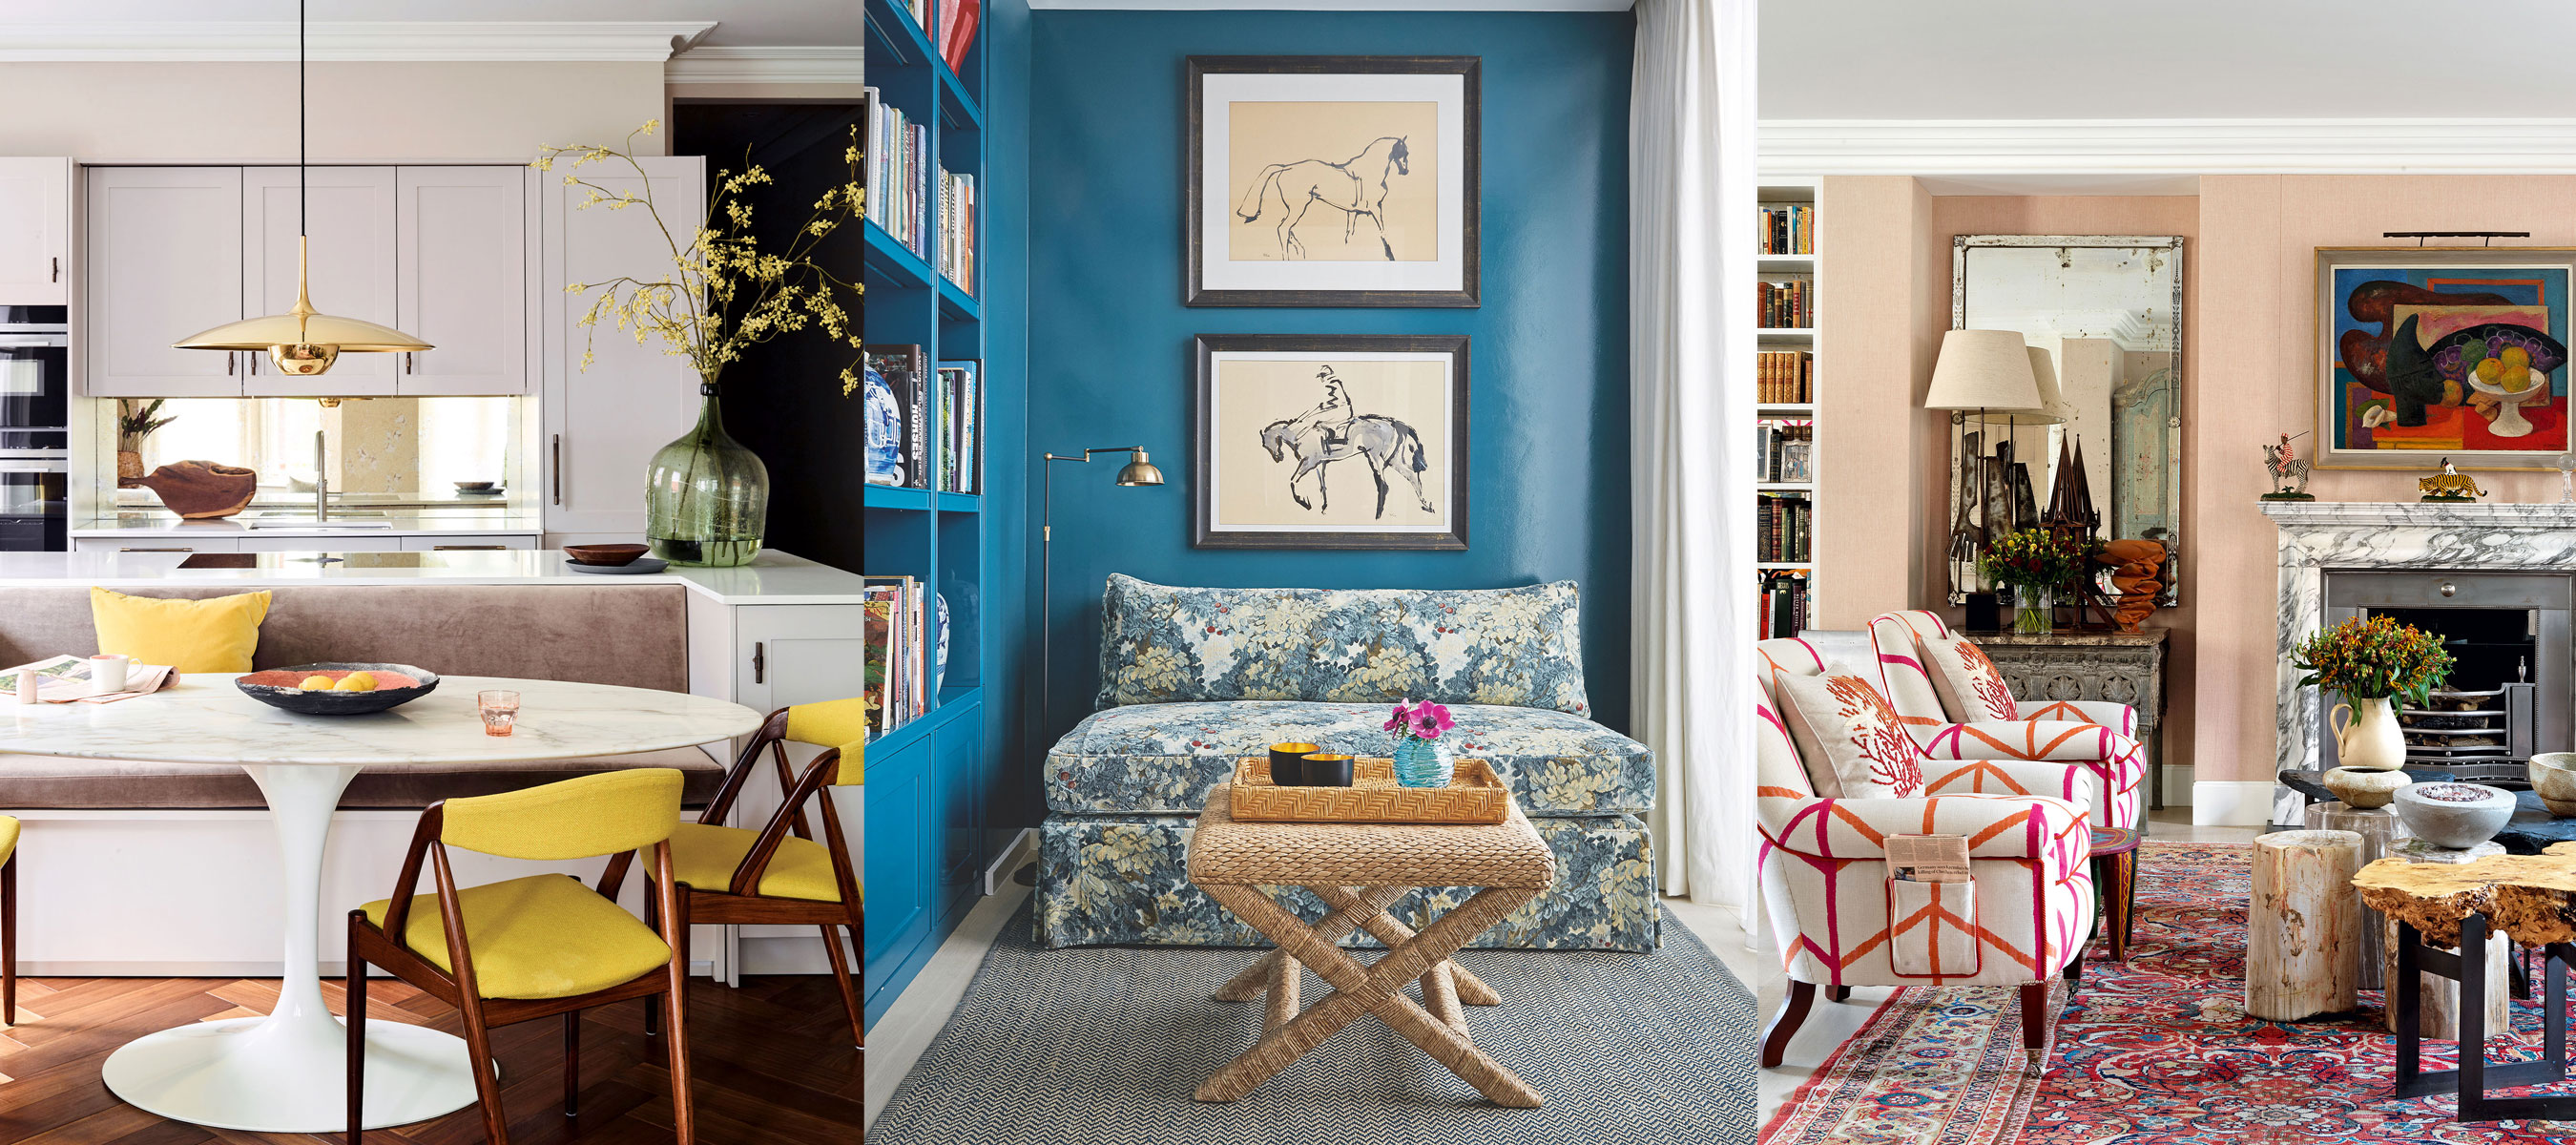 accent chair ideas: 10 rules for chair layouts, looks and trends |